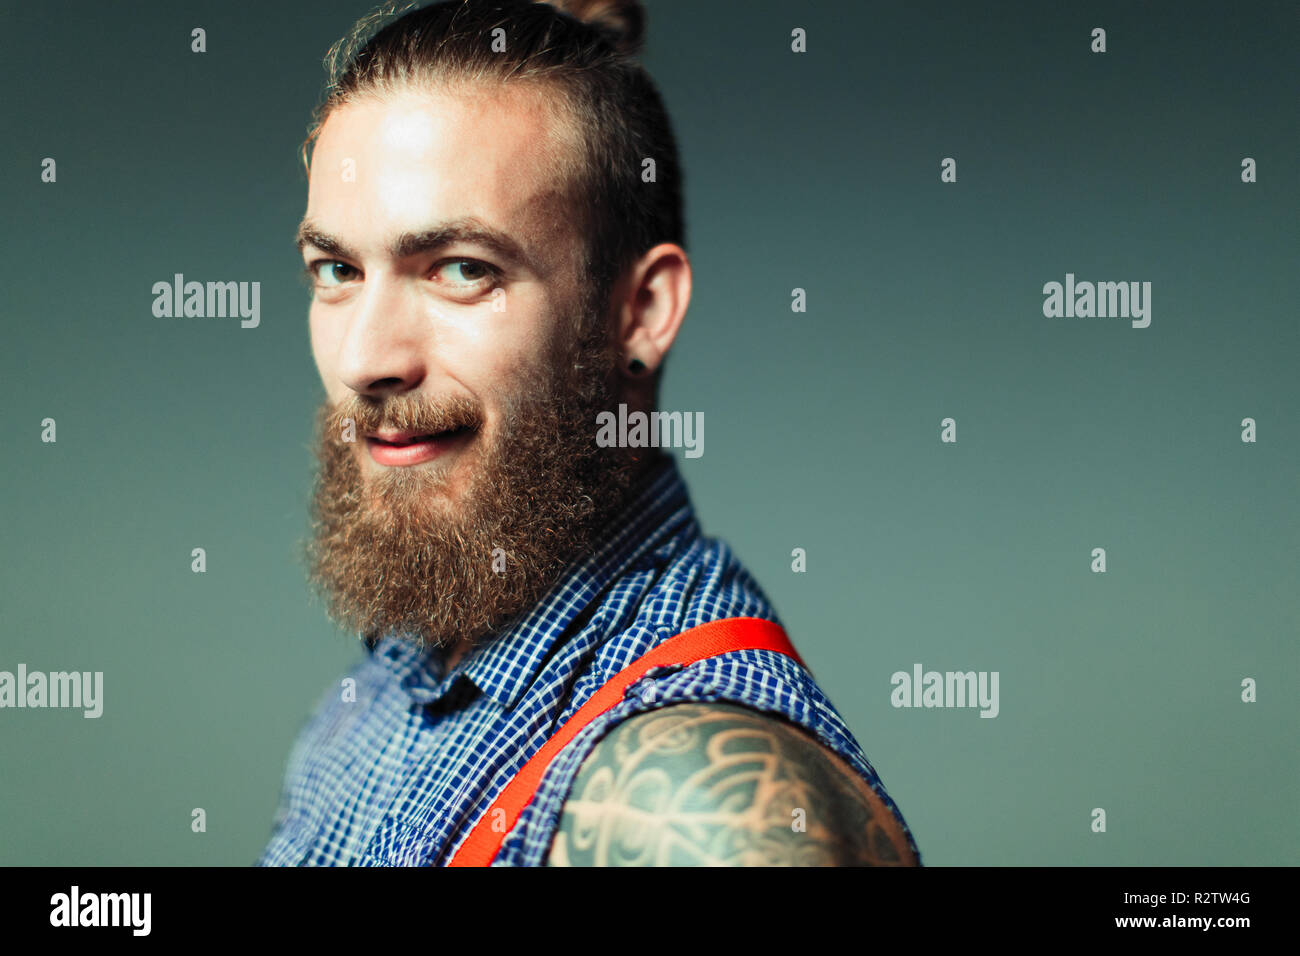 Portrait confident, cool male hipster with beard and shoulder tattoo Stock Photo